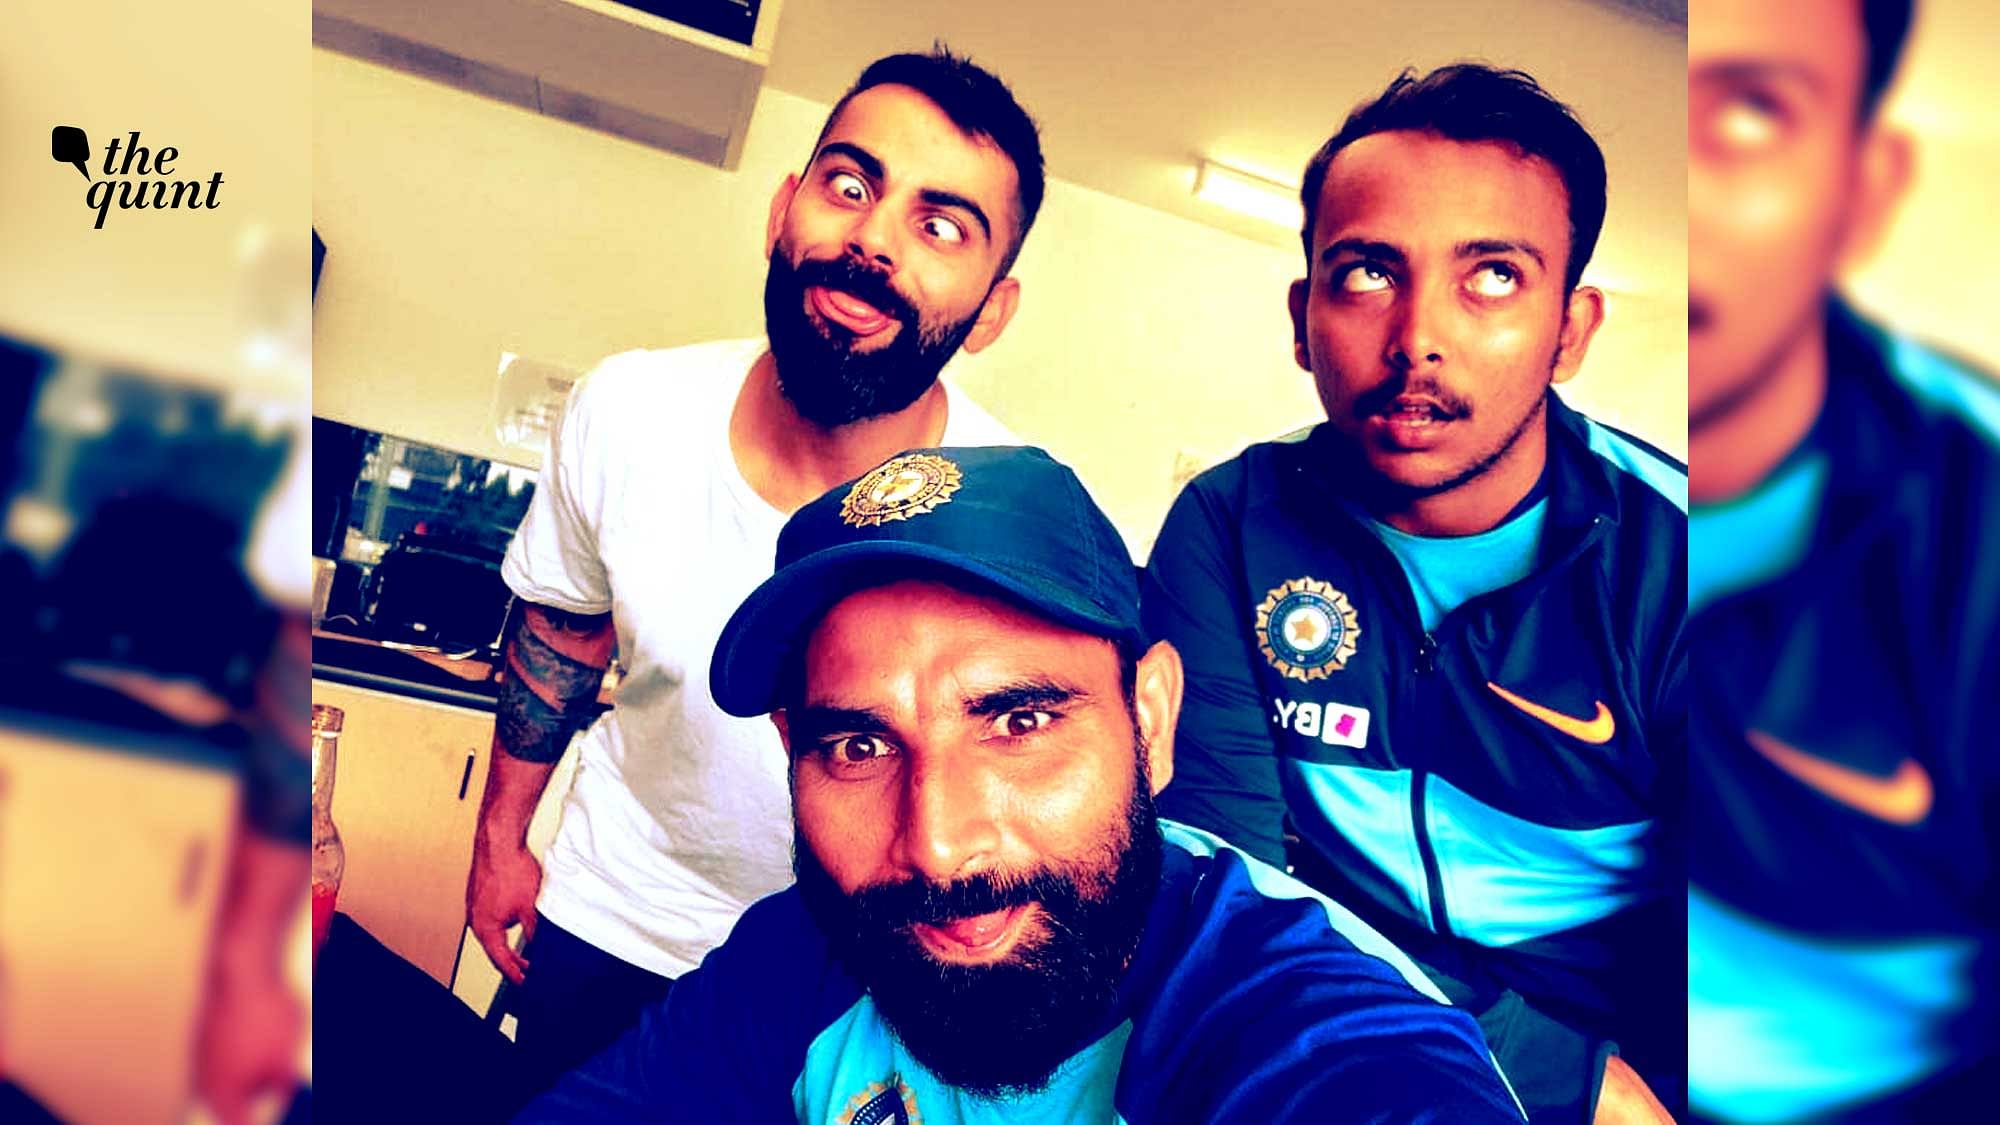 Virat Kohli posted a quirky picture with Shami and Prithvi Shaw.